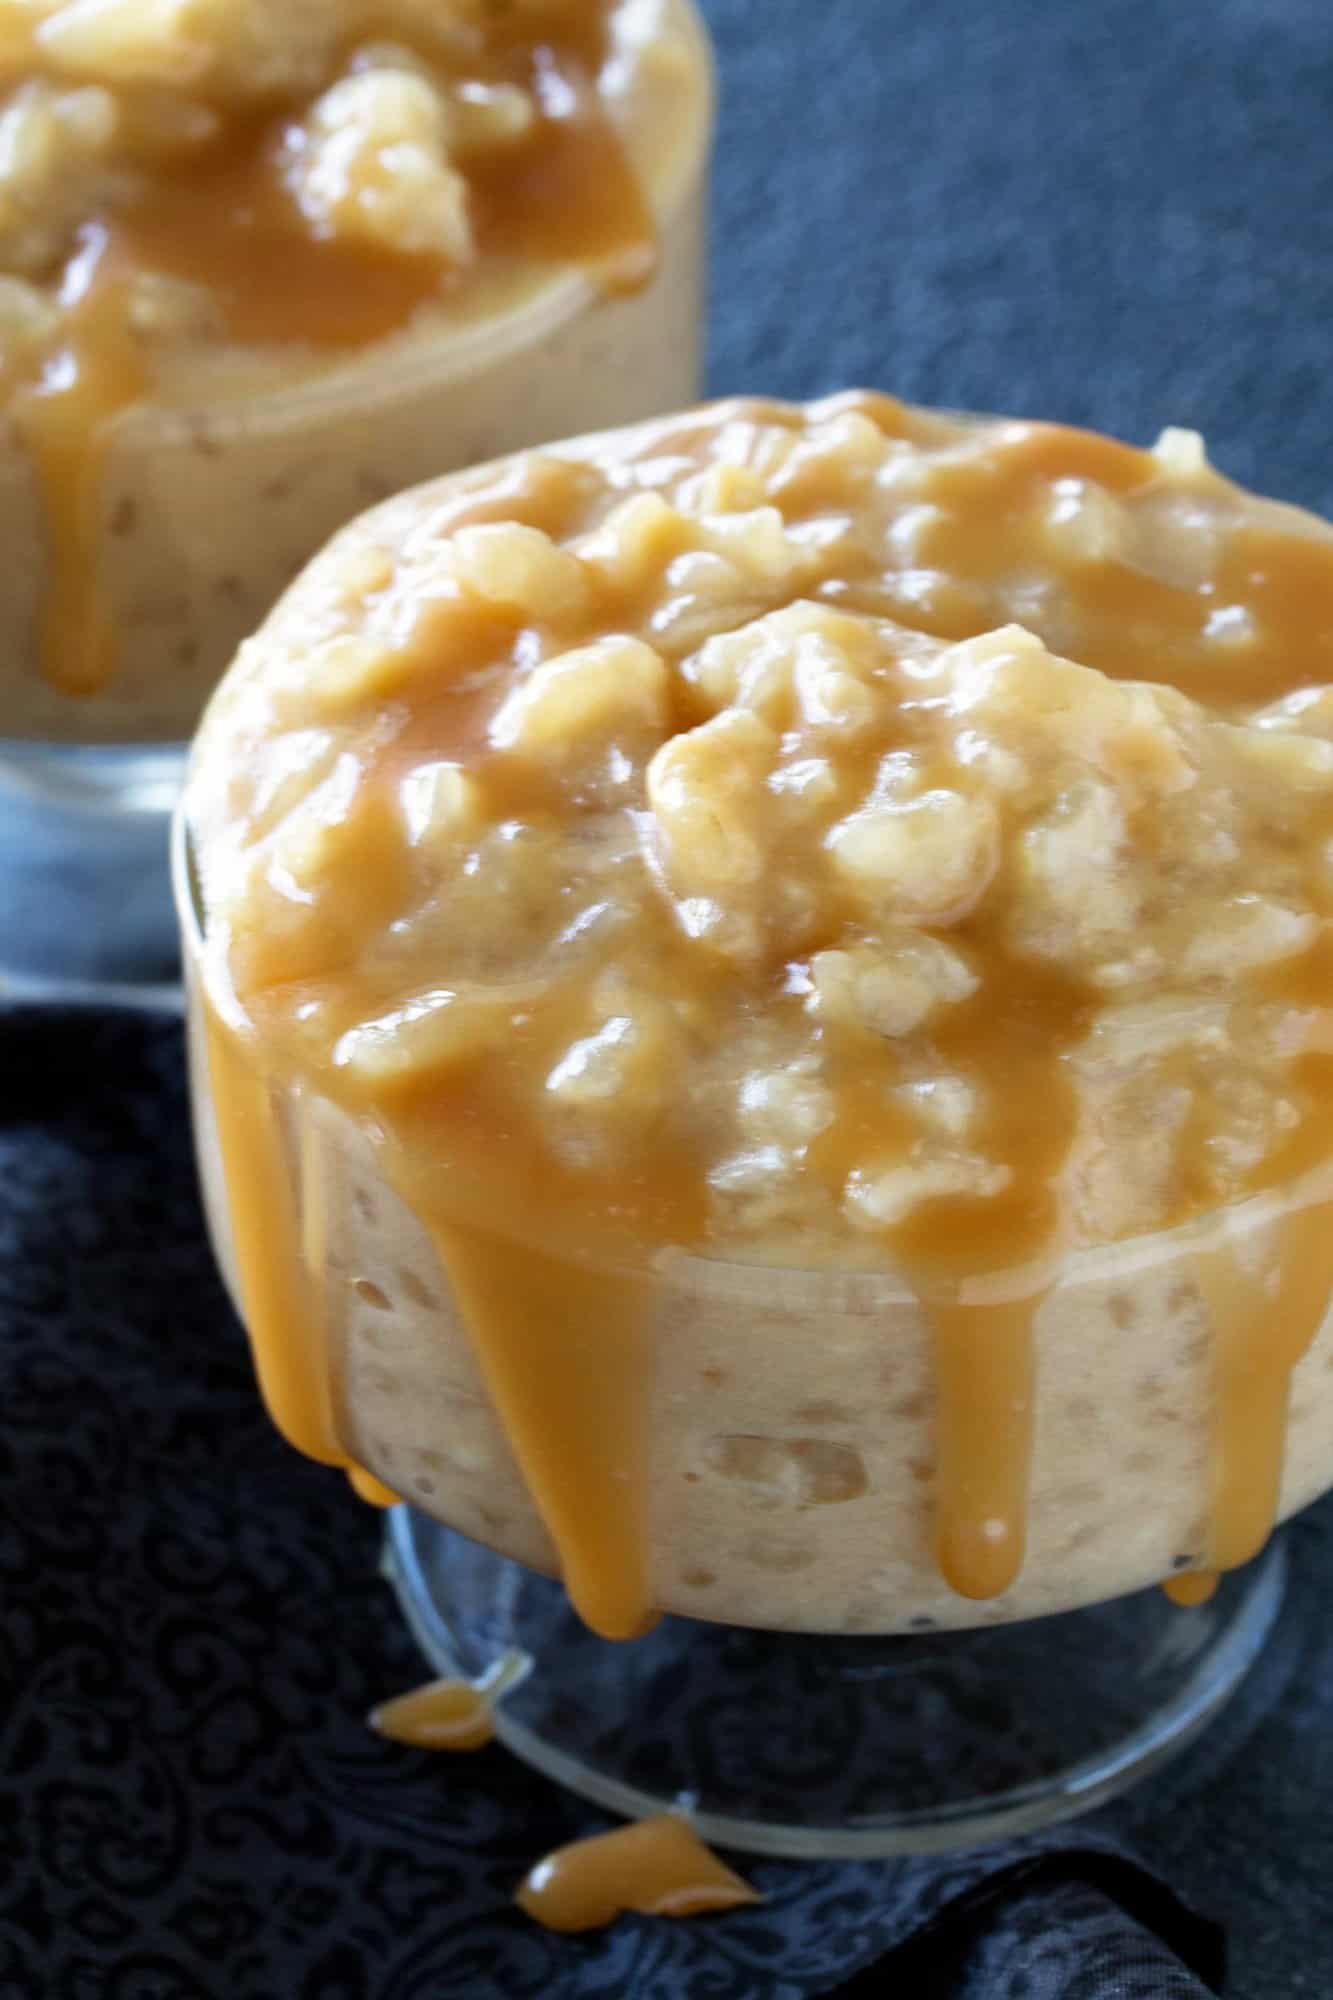 This classic dessert gets a modern upgrade. Make Salted Caramel Rice Pudding from scratch and enjoy a decadent twist on an old fashioned favorite.